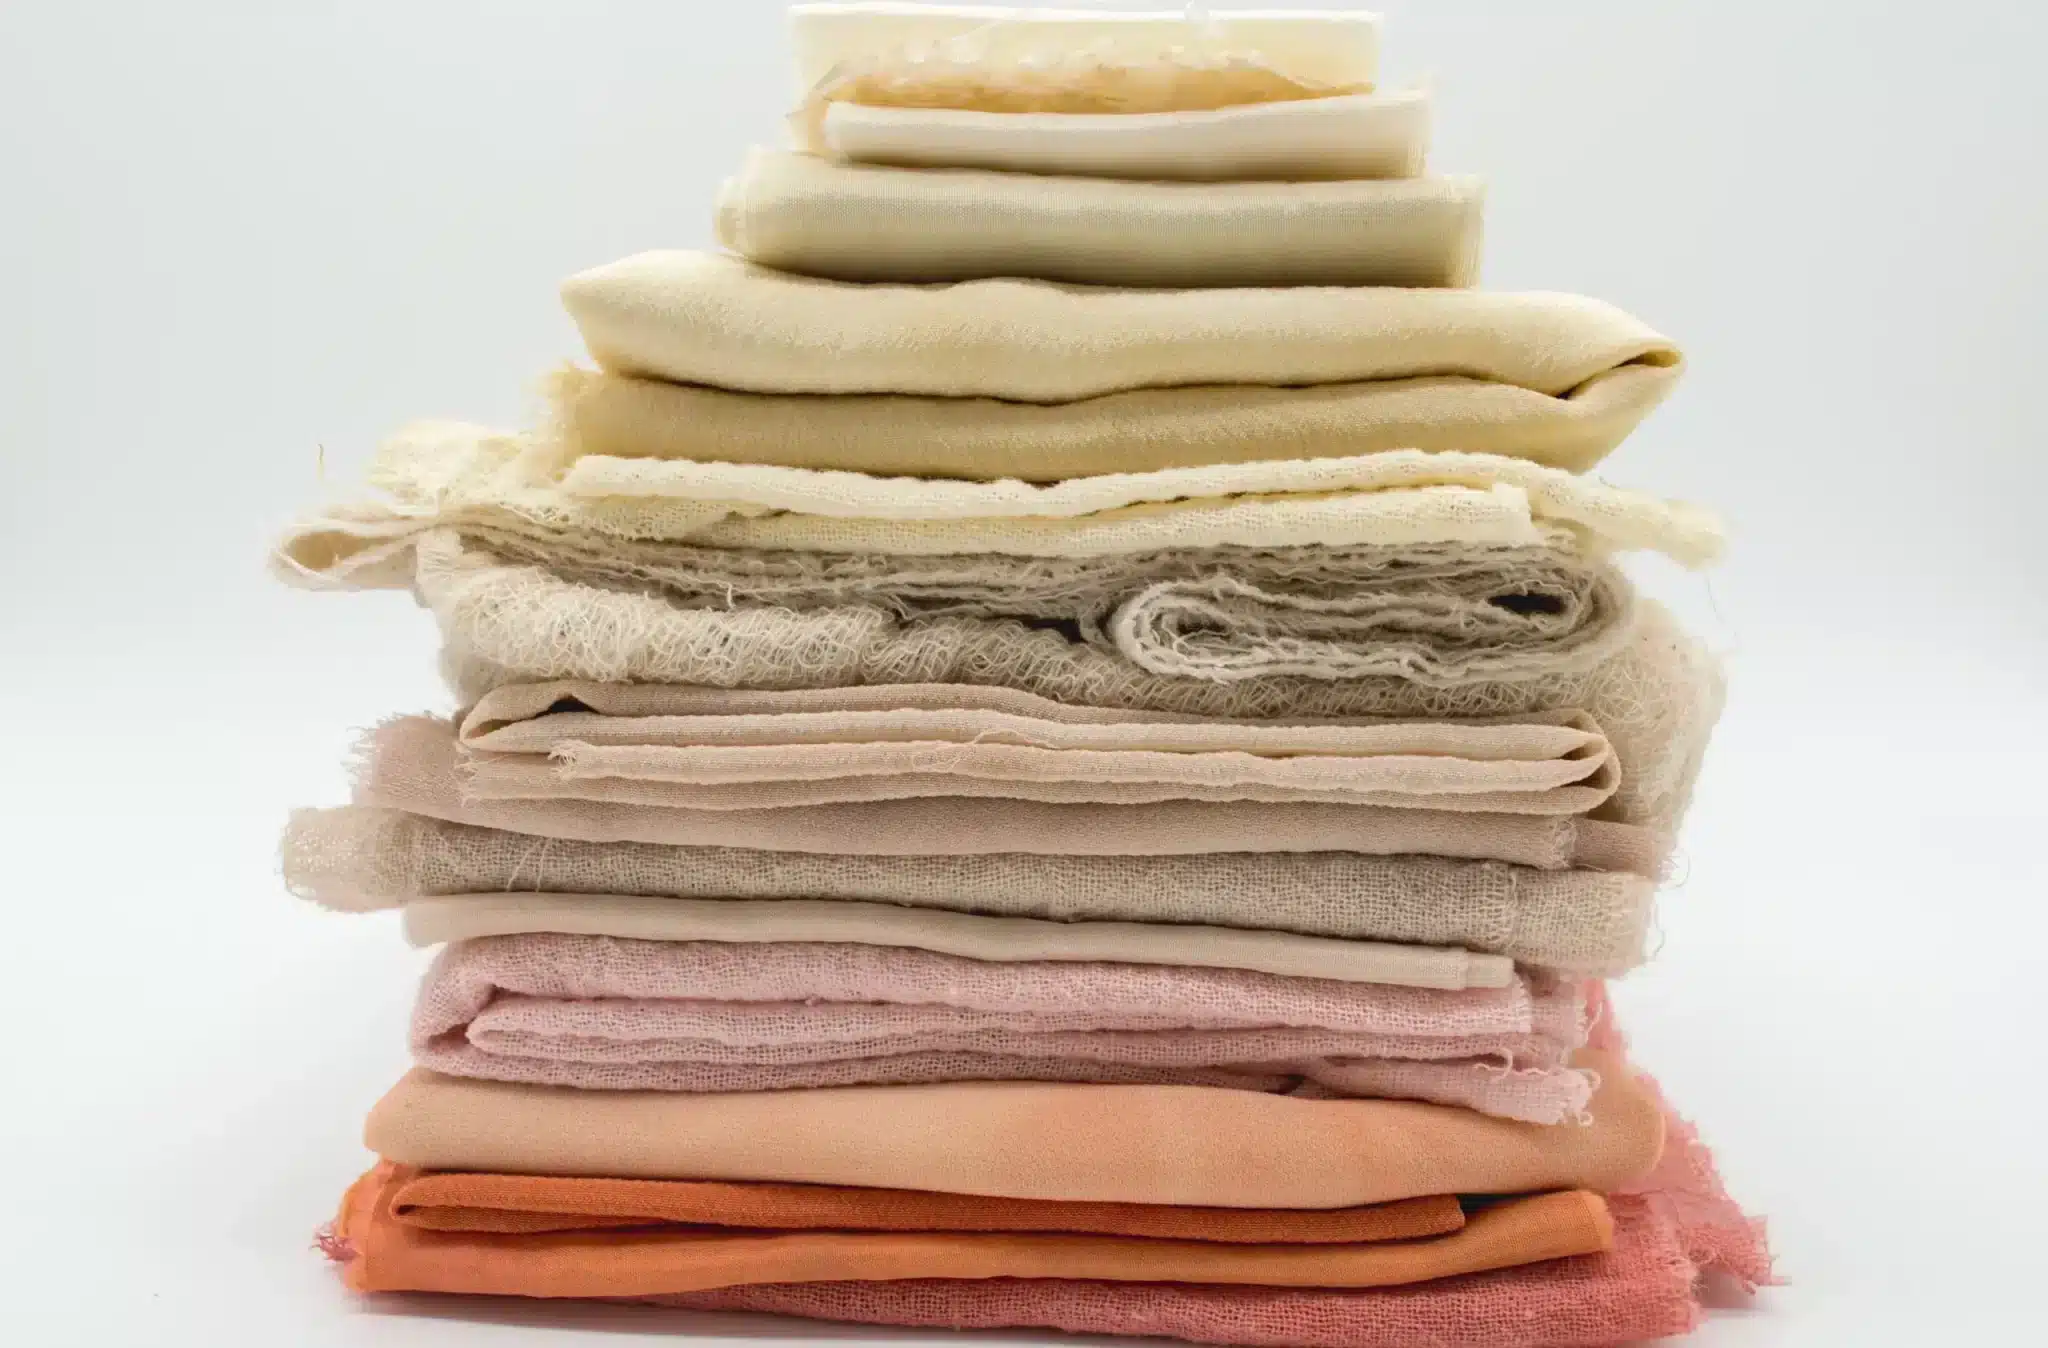 A neatly stacked pile of fabrics in a gradient of colors, from cream and beige to dusty pink and terracotta, creating a soothing palette. The textures range from smooth and fine to more rustic and loosely woven, suggesting a variety of uses in textile design.